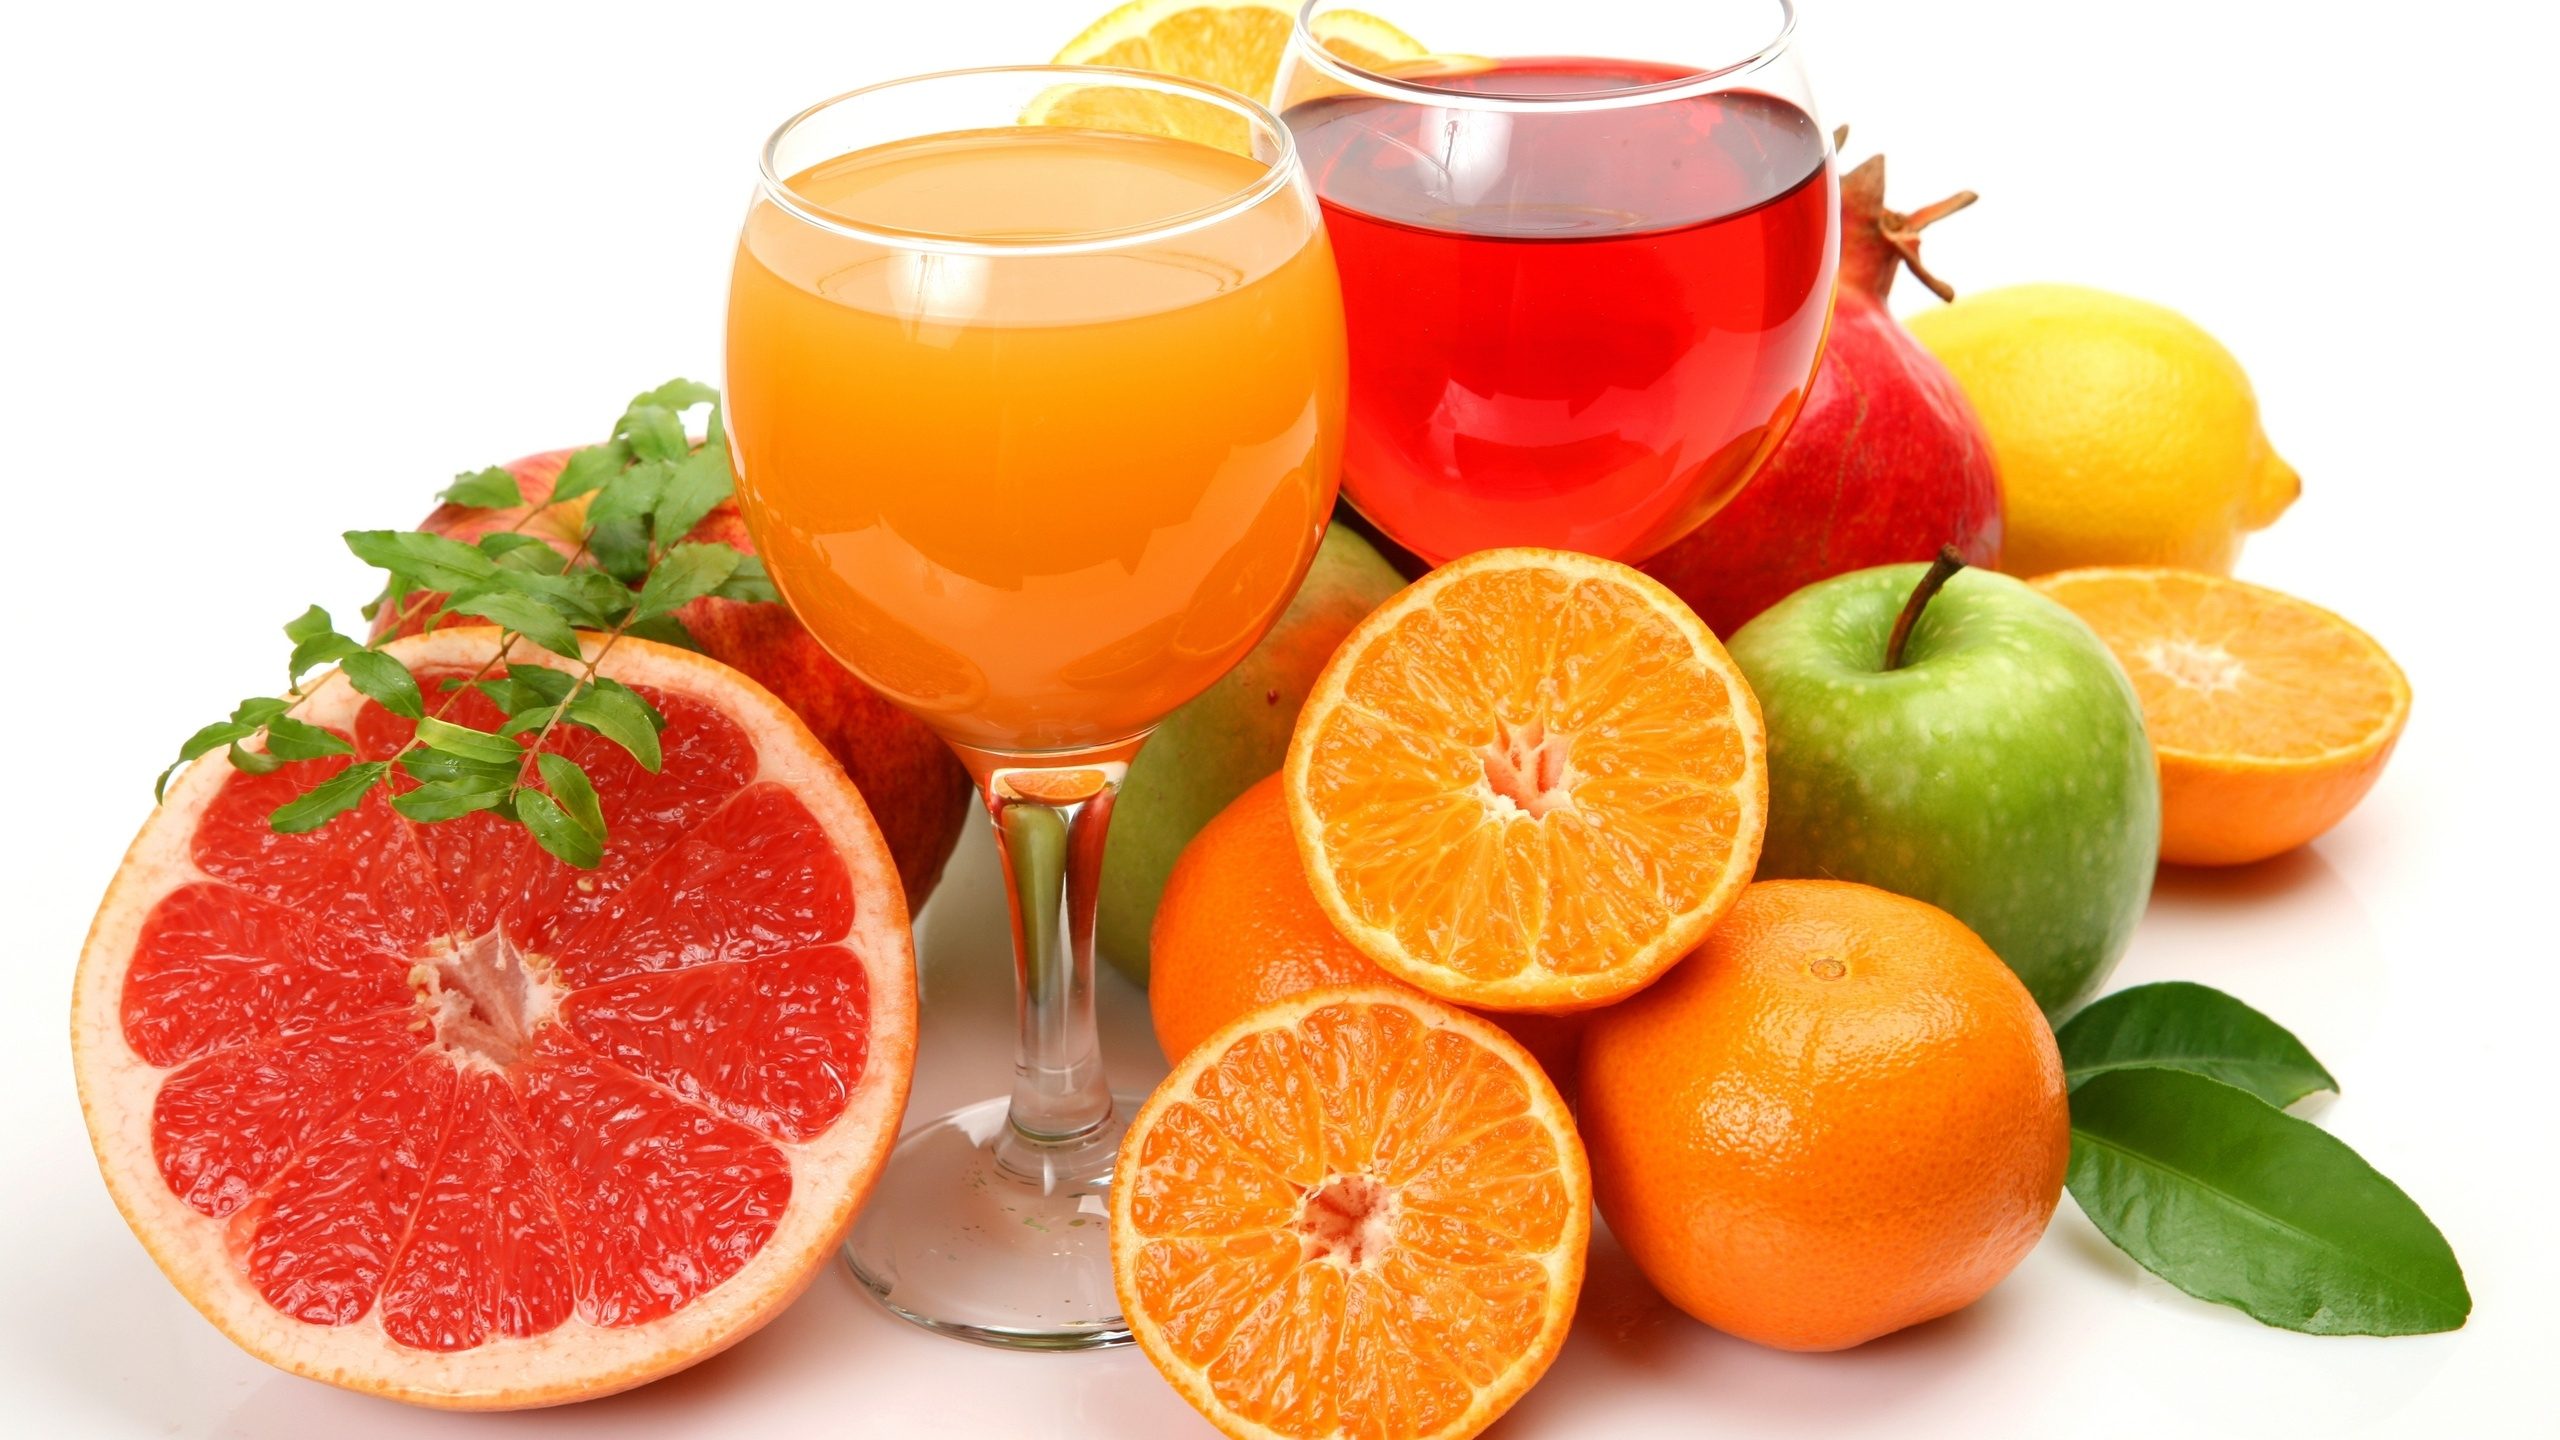 Fruits With Juice Glasses - HD Wallpaper 